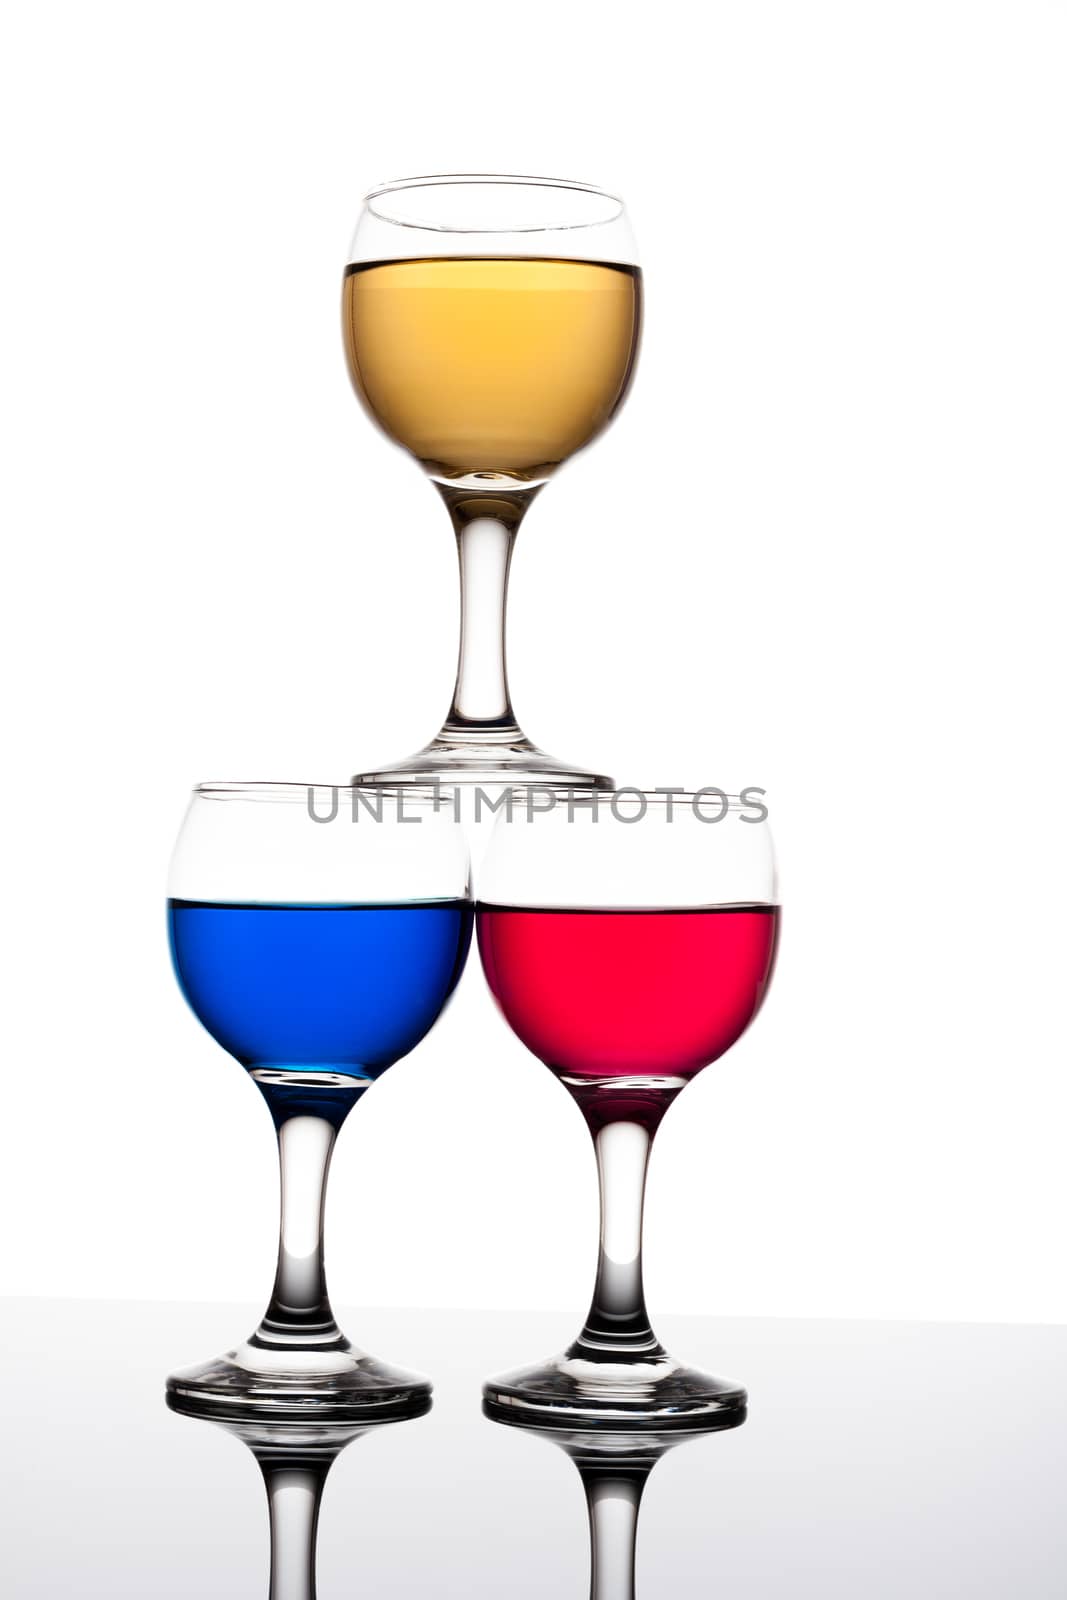 red, yellow and blue backlit drinks with reflection